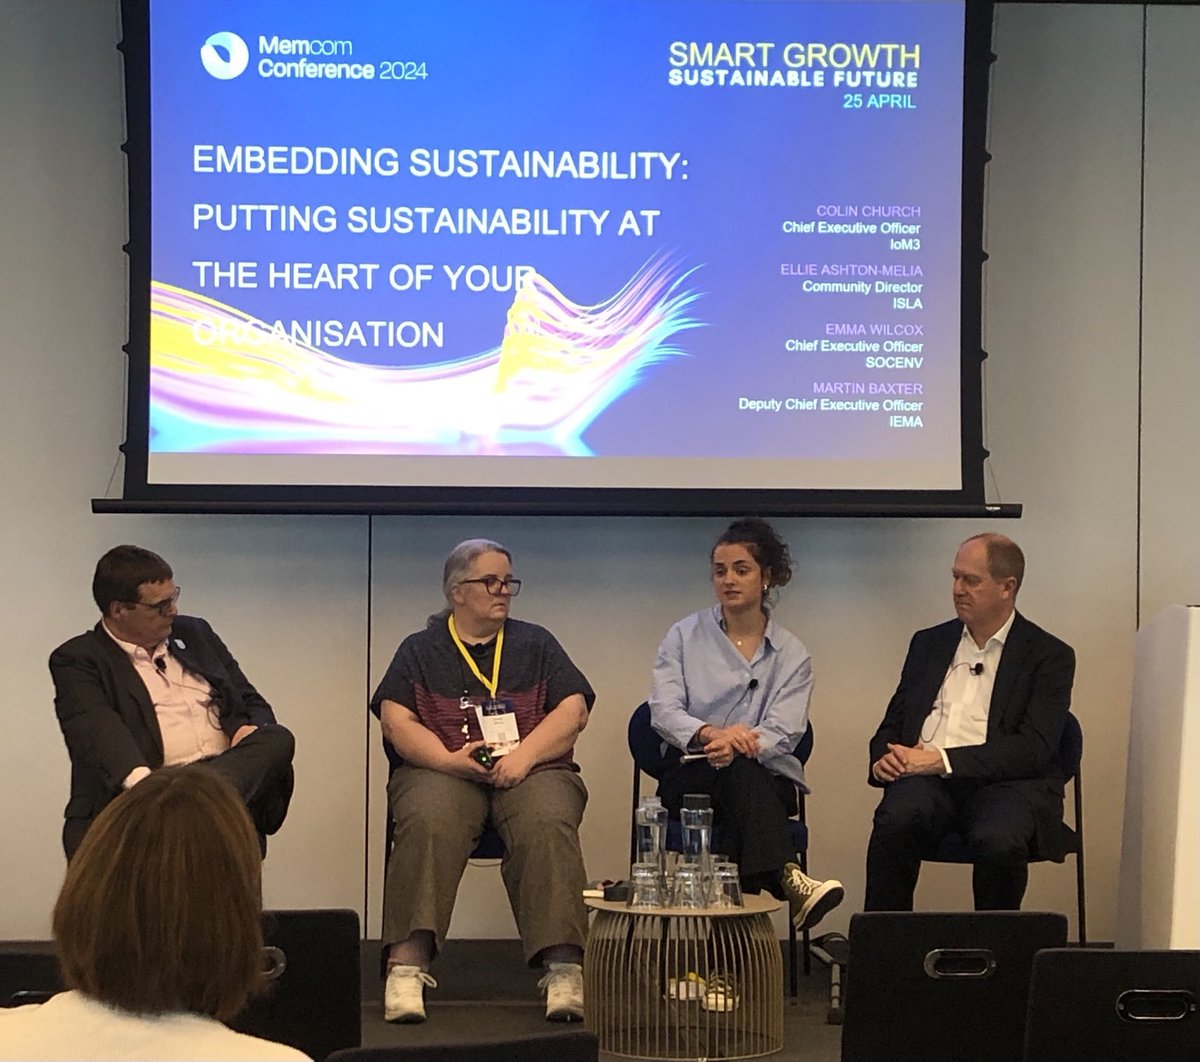 Embedding sustainability session at MemcomConference2024 - ‘how can international member events be sustainable?’ ⁦@DrColinChurch⁩ ‘you have to weigh up the benefits and what you can do to mitigate environmental impact’ #memcom #sustainability #eventsmanagement